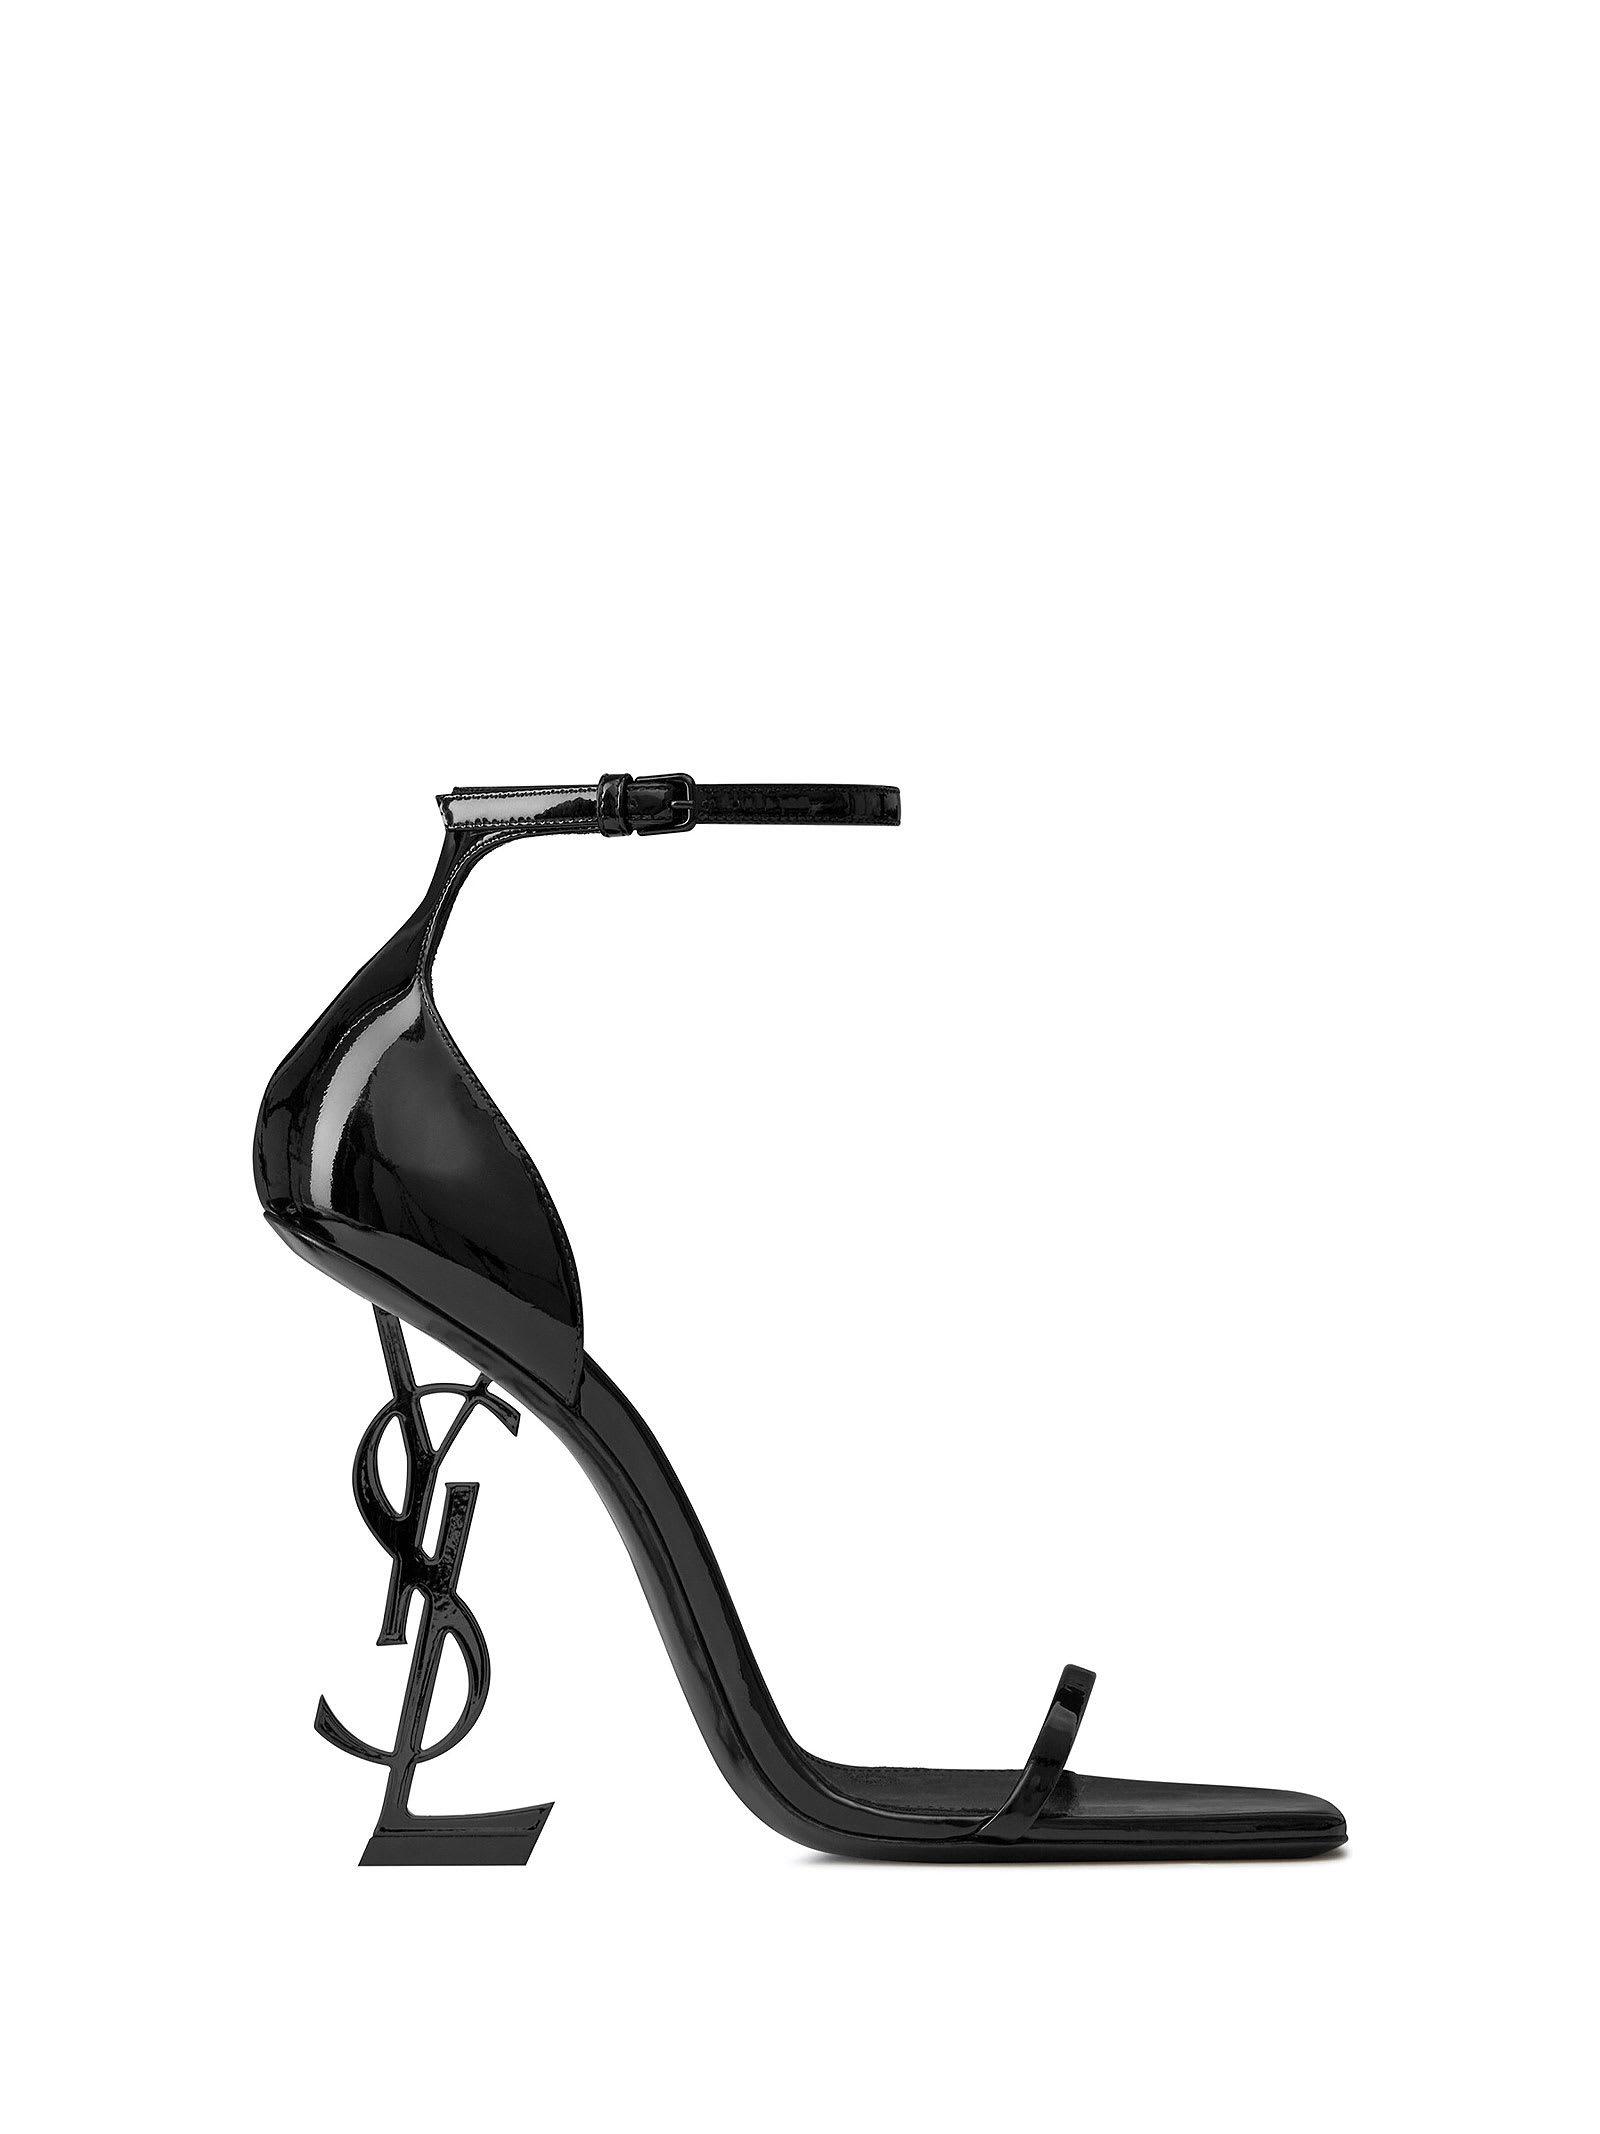 Buy Saint Laurent Opyum Sandals In Leather online, shop Saint Laurent shoes with free shipping